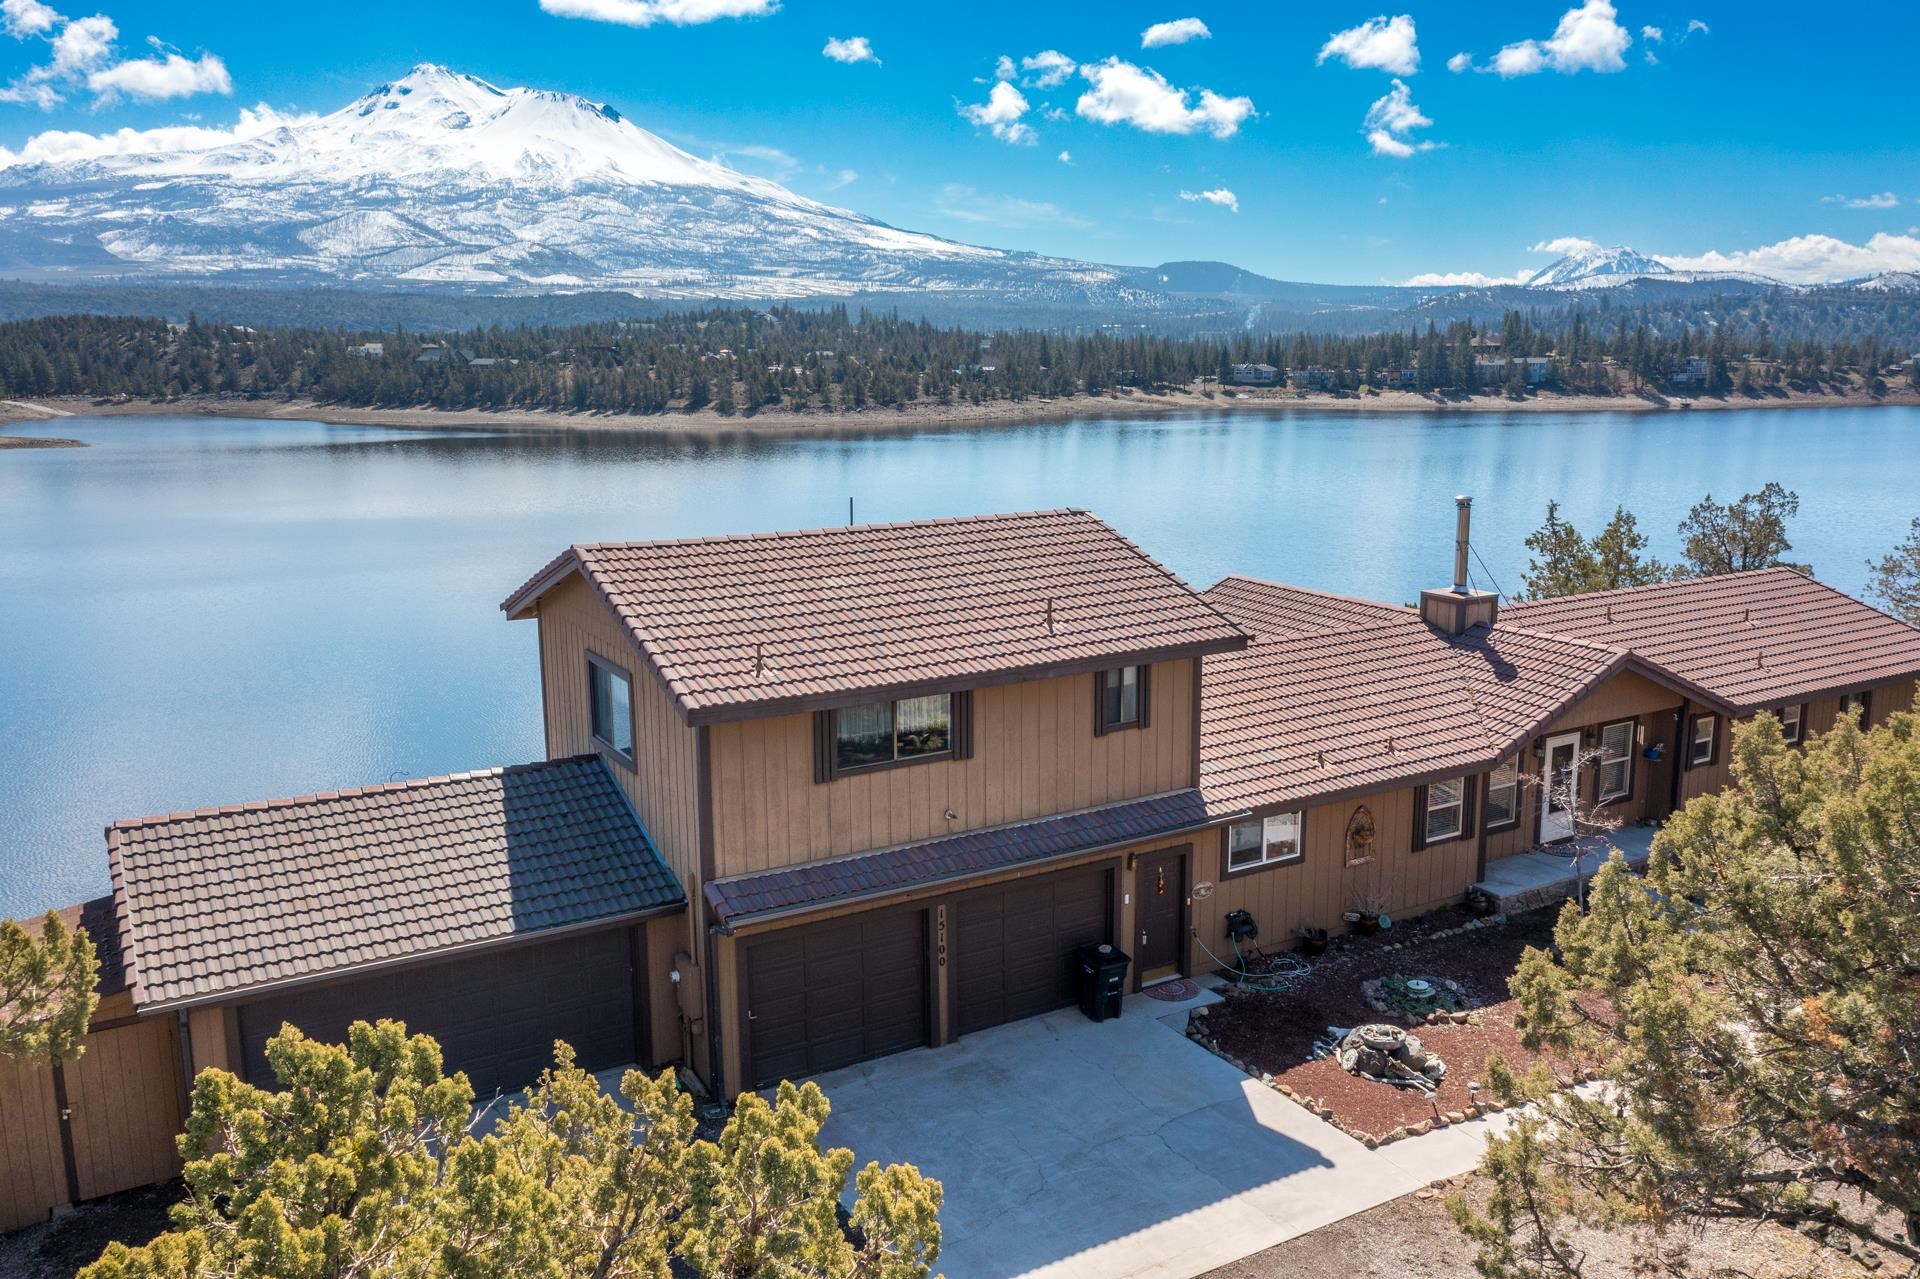 Absolutely stunning views of Mt. Shasta rising above Lake Shastina from this one of a kind custom home. Nestled on a 1.38 acre property with 386 feet of lake frontage this location and view are priceless! If there has ever been a home that needs to be seen in person to be fully appreciated...this is it. Boasting 3 bedrooms, plus an office and 4 car garage, with the unique separate living space including its own kitchen and bathroom. There are very few places in Lake Shastina zoned for multi-family, don't miss this outstanding opportunity.